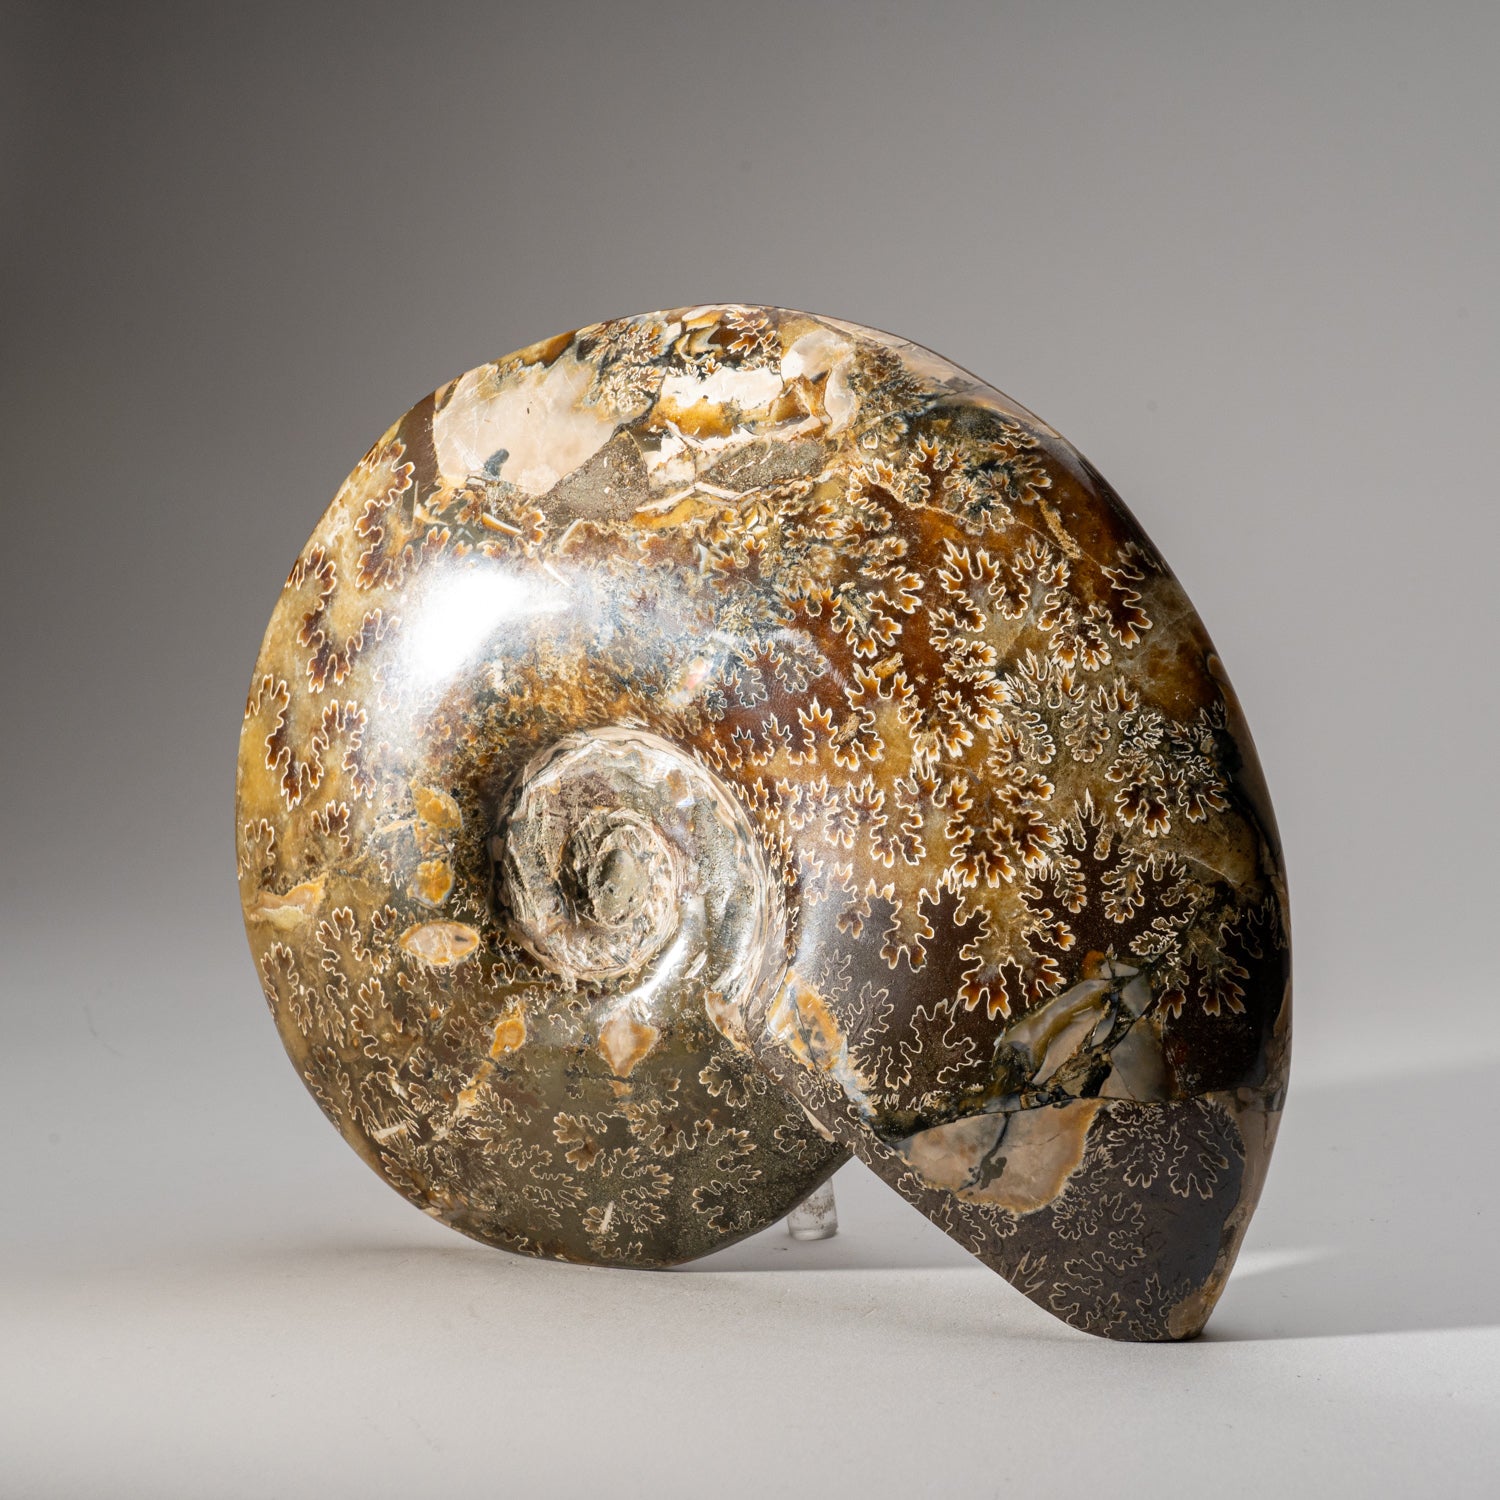 Genuine Natural Calcified Ammonite Fossil (4.6 lbs)